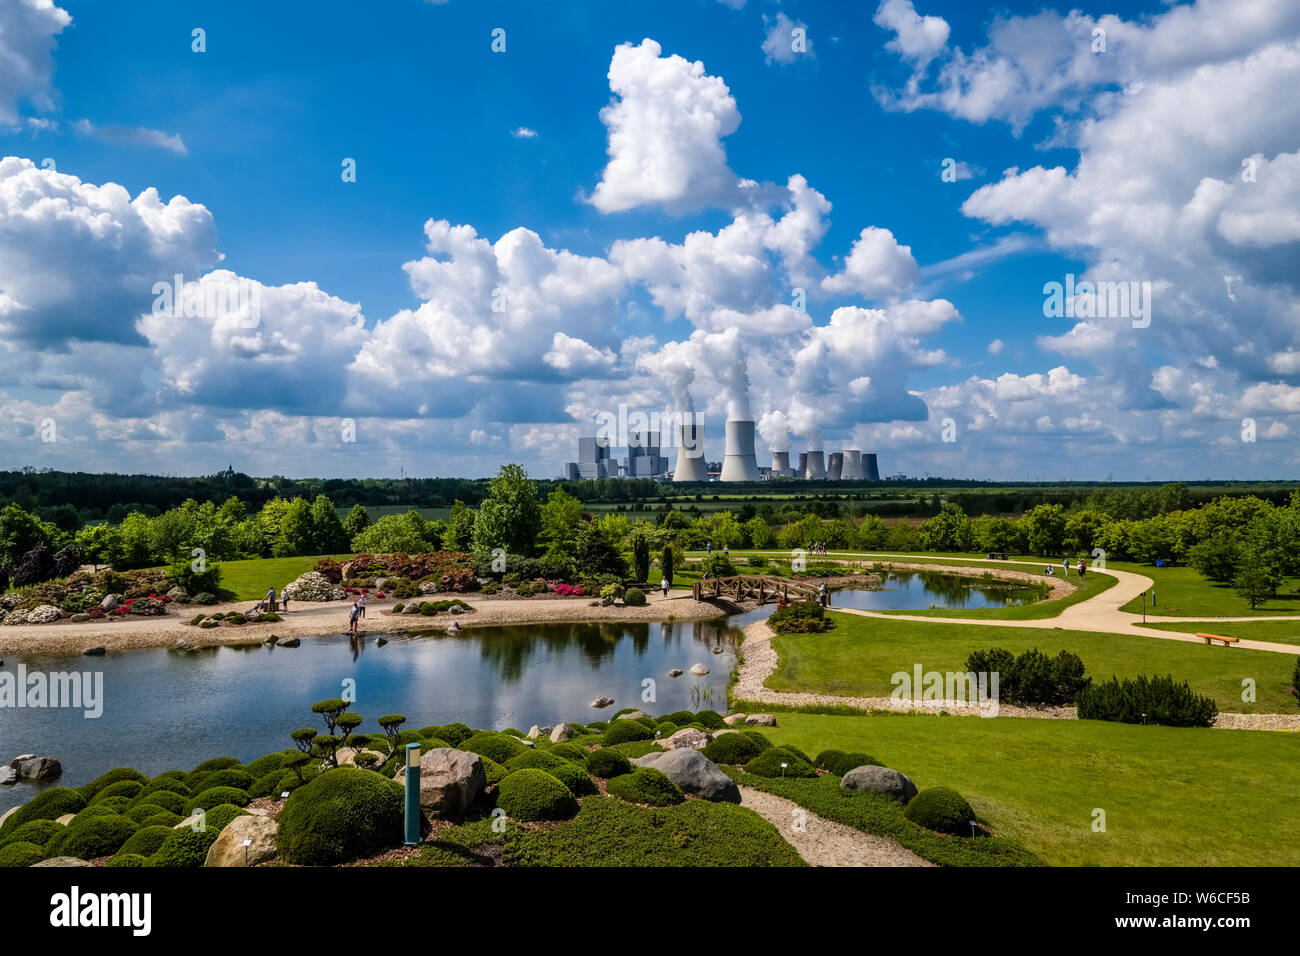 The buildings and steaming cooling towers of a coal-fired power plant behind a landscape park Stock Photo